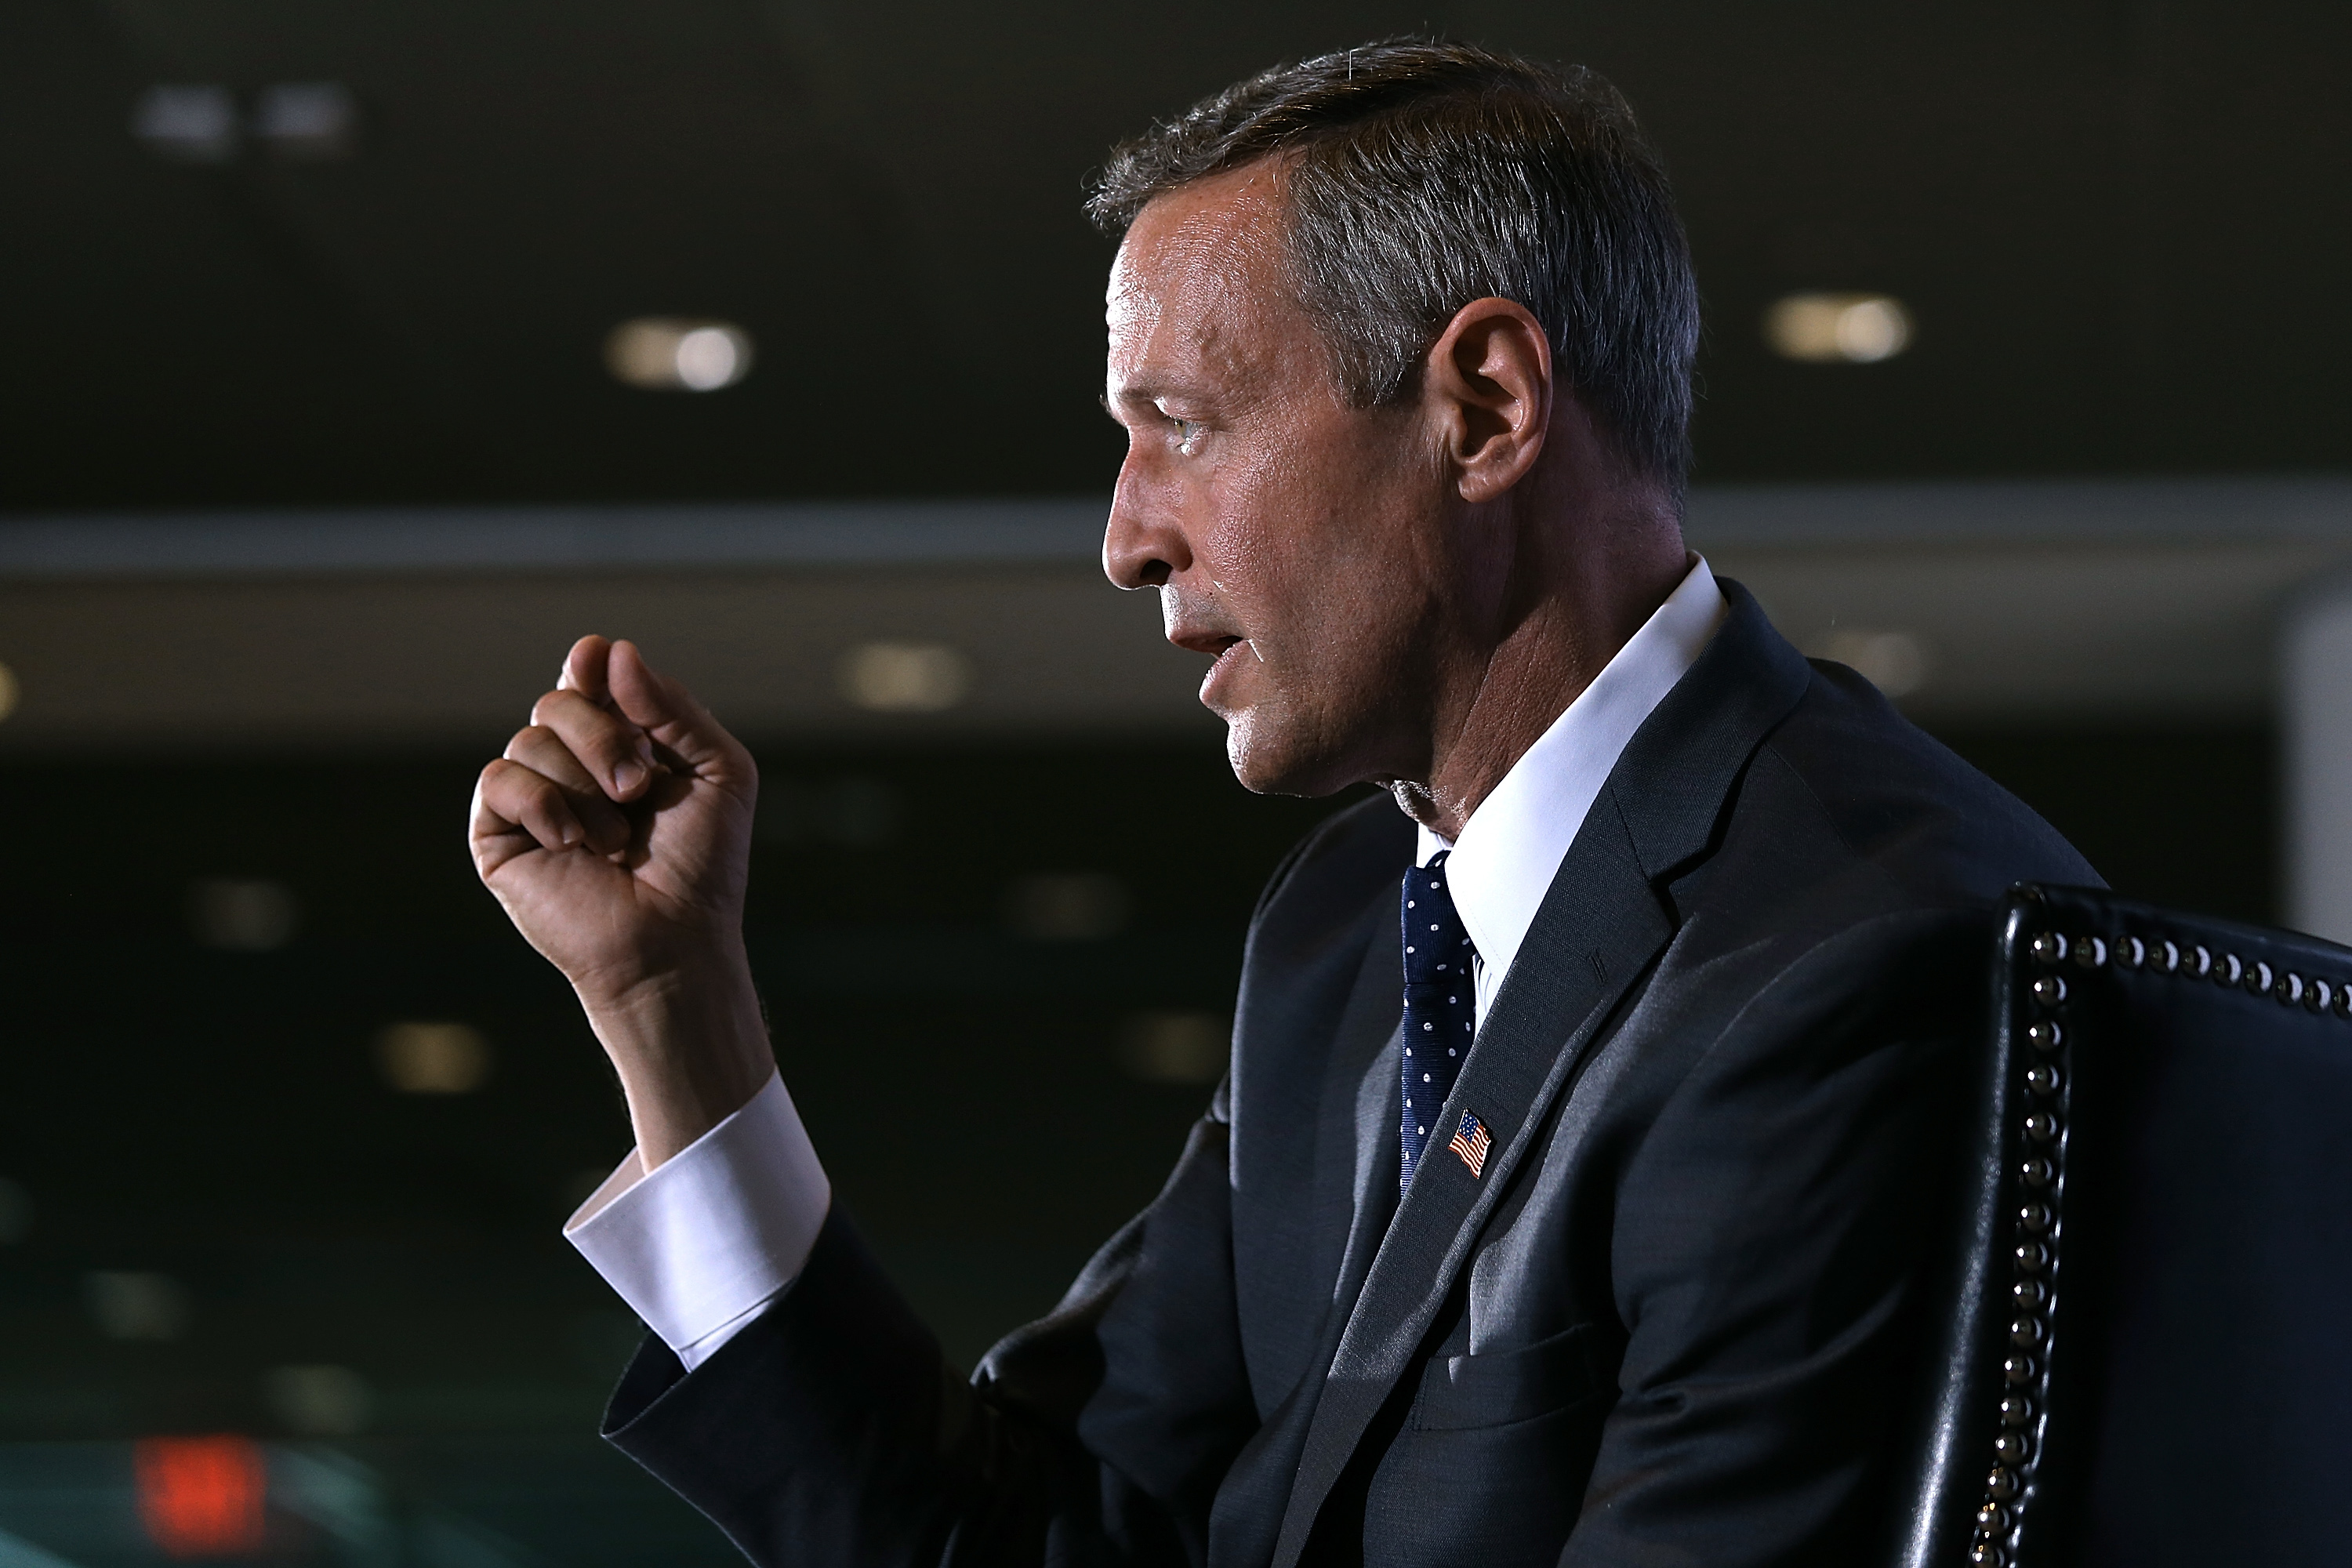 U.S. Democratic presidential candidate and former Maryland Gov. Martin O'Malley speaks at the U.S. Hispanic Chamber of Commerce in Washington, DC. on June 3, 2015. (Win McNamee—Getty Images)